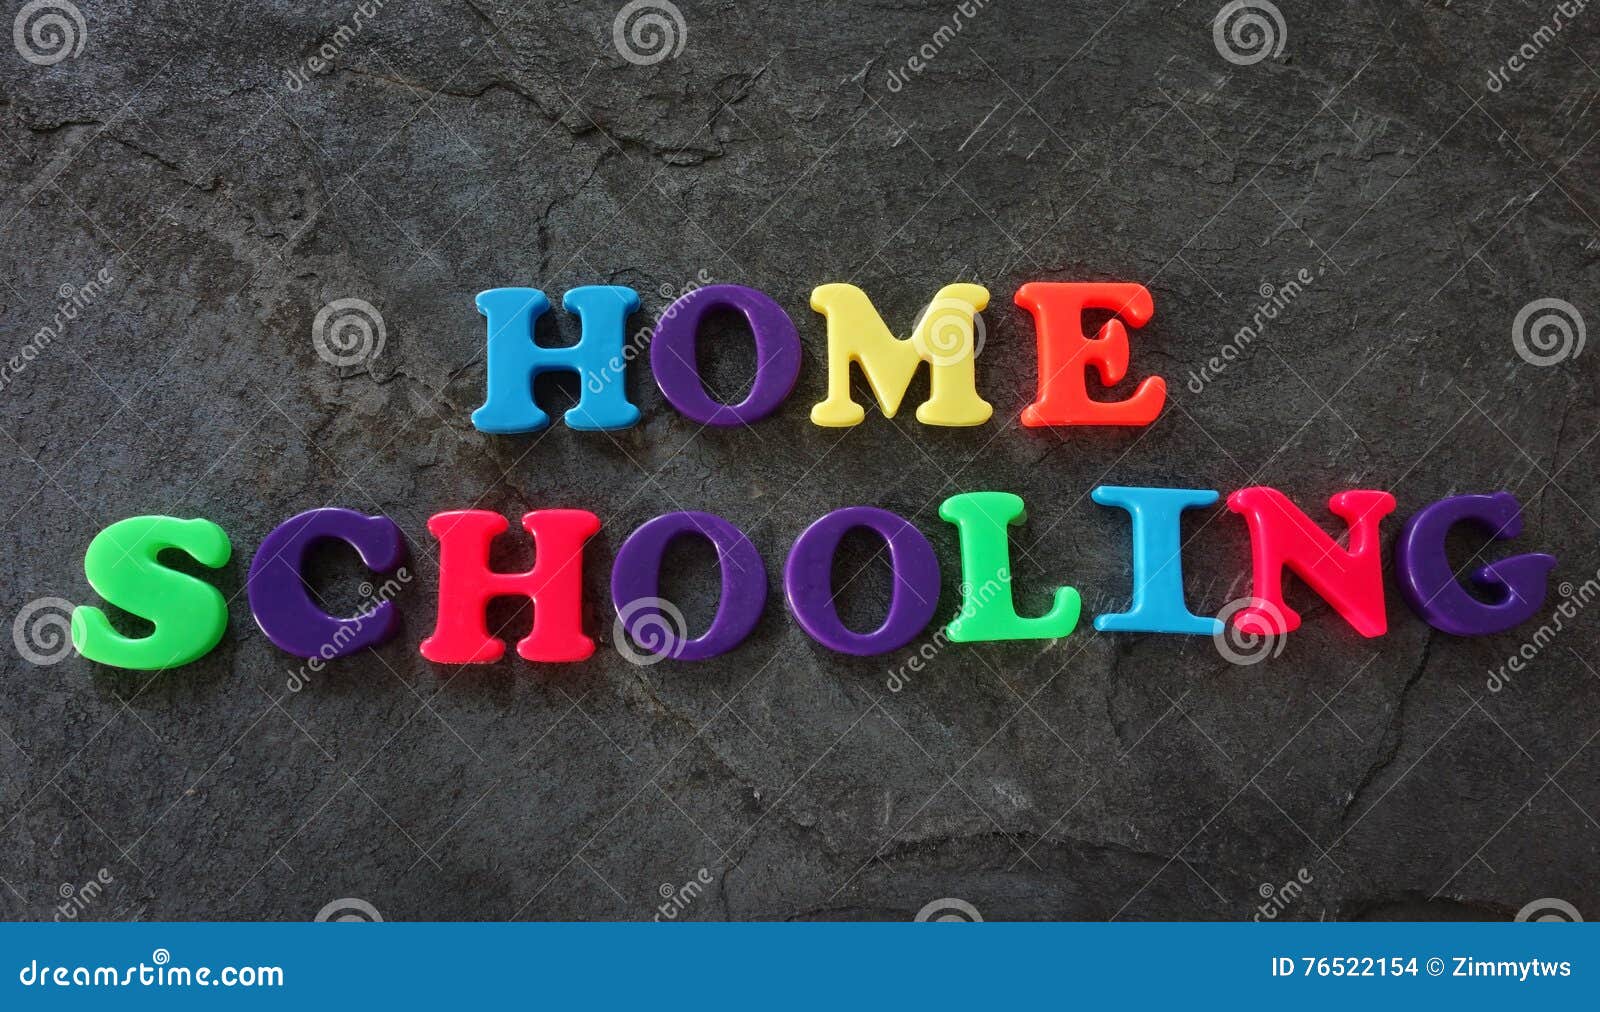 home schooling letters